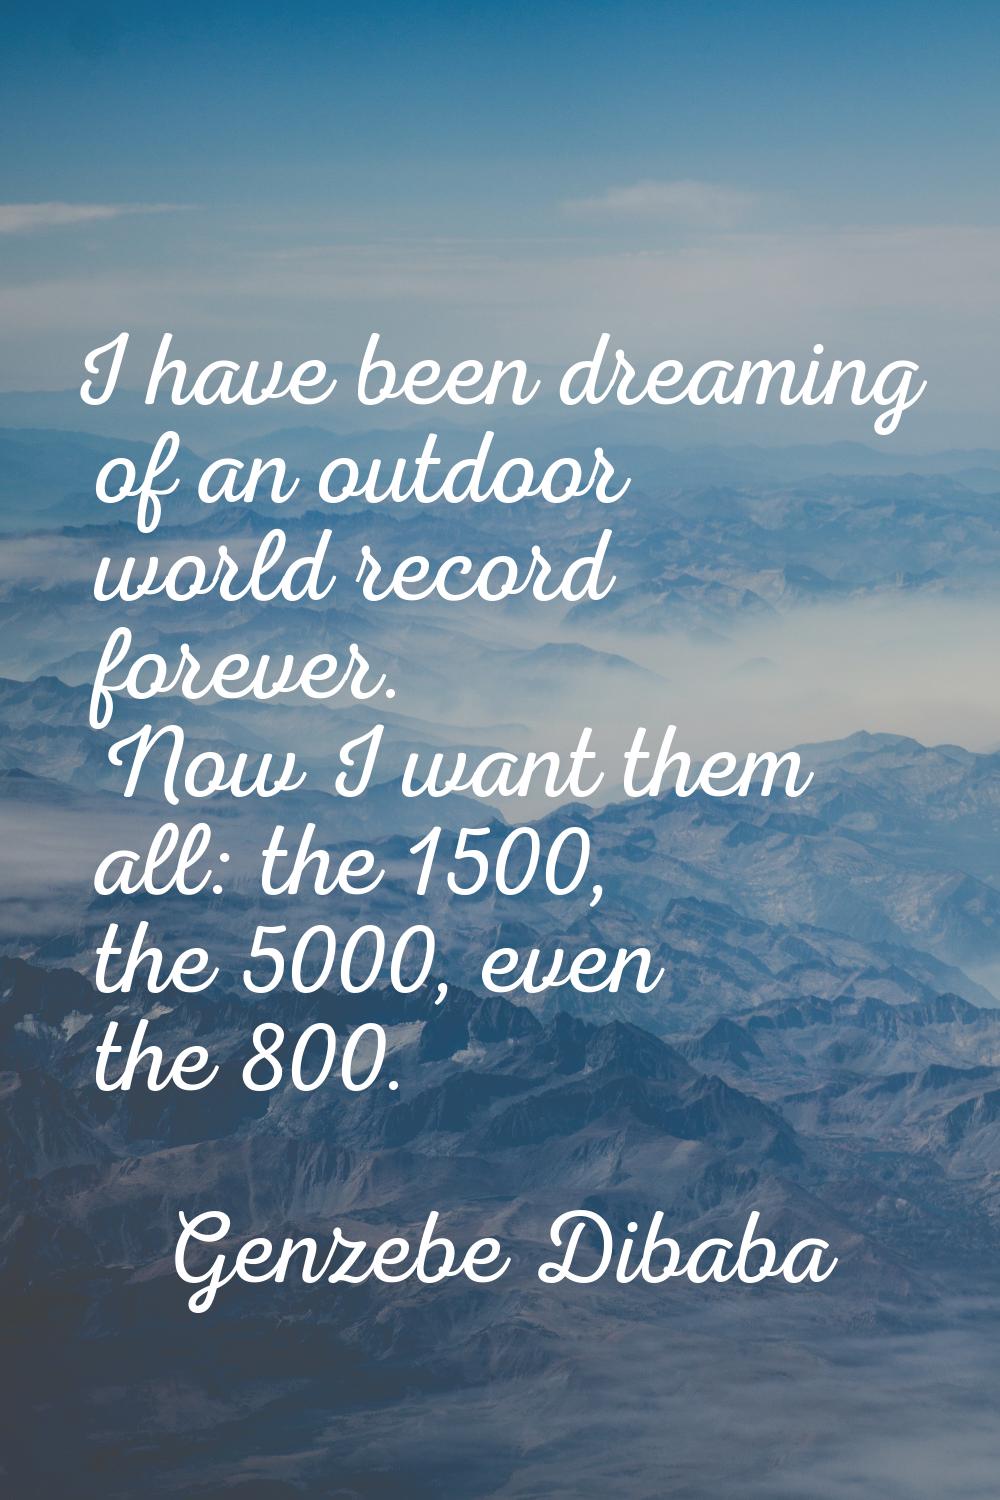 I have been dreaming of an outdoor world record forever. Now I want them all: the 1500, the 5000, e